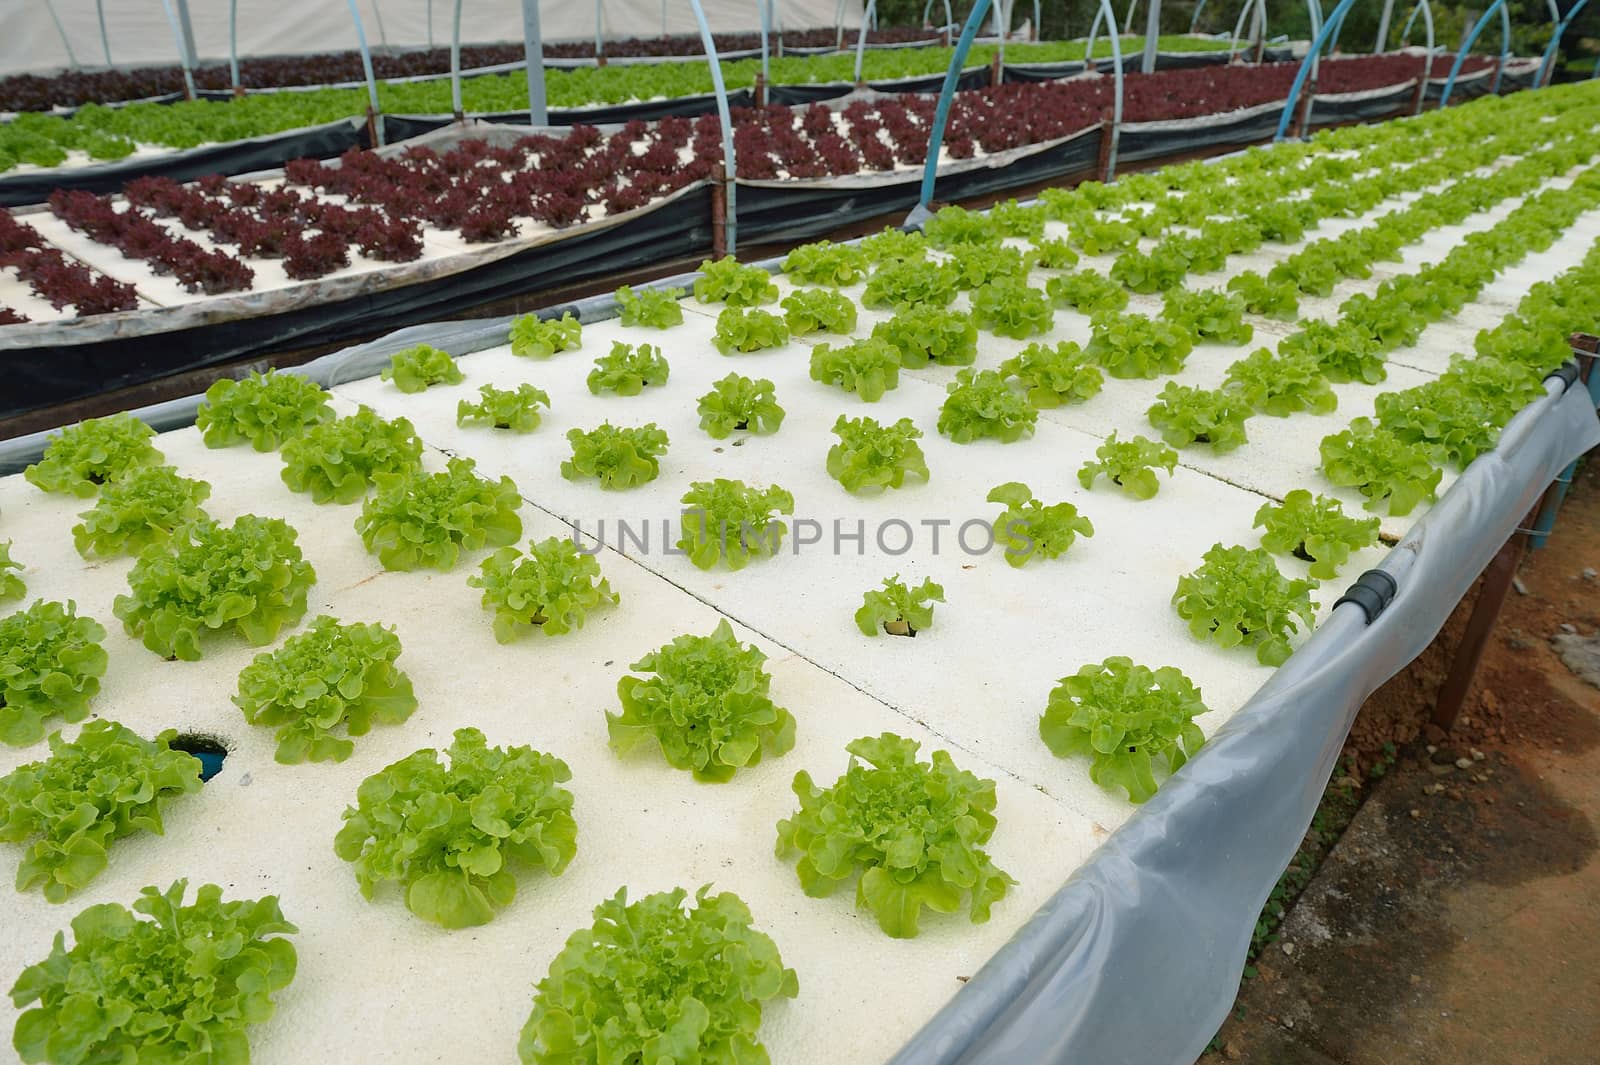 hydroponic farm at Doi Angkhang royal project, Chiangmai, Thaila by think4photop